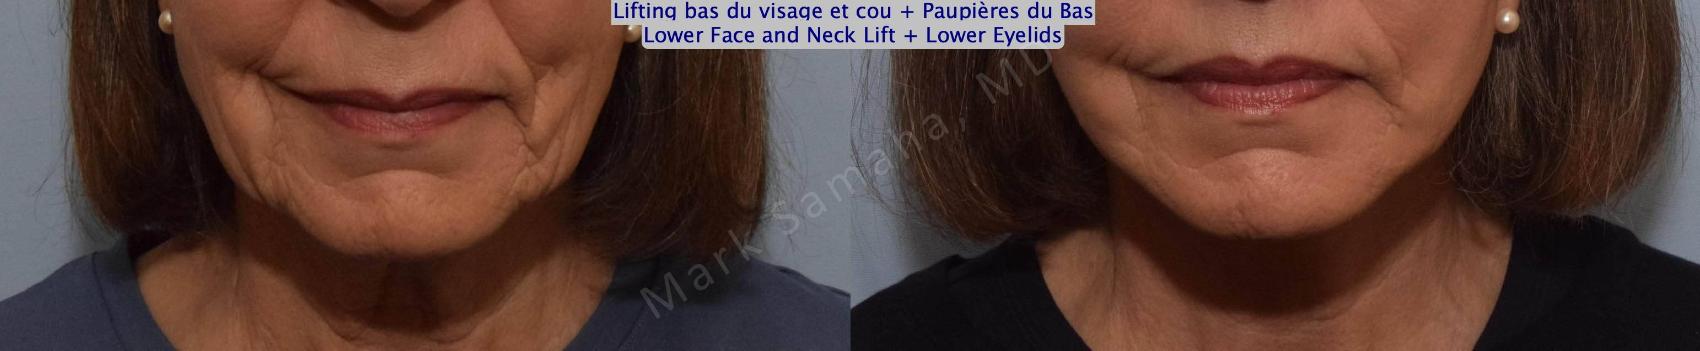 Before & After Lifting du visage / Cou - Facelift / Necklift Case 162 Front View in Montreal, QC